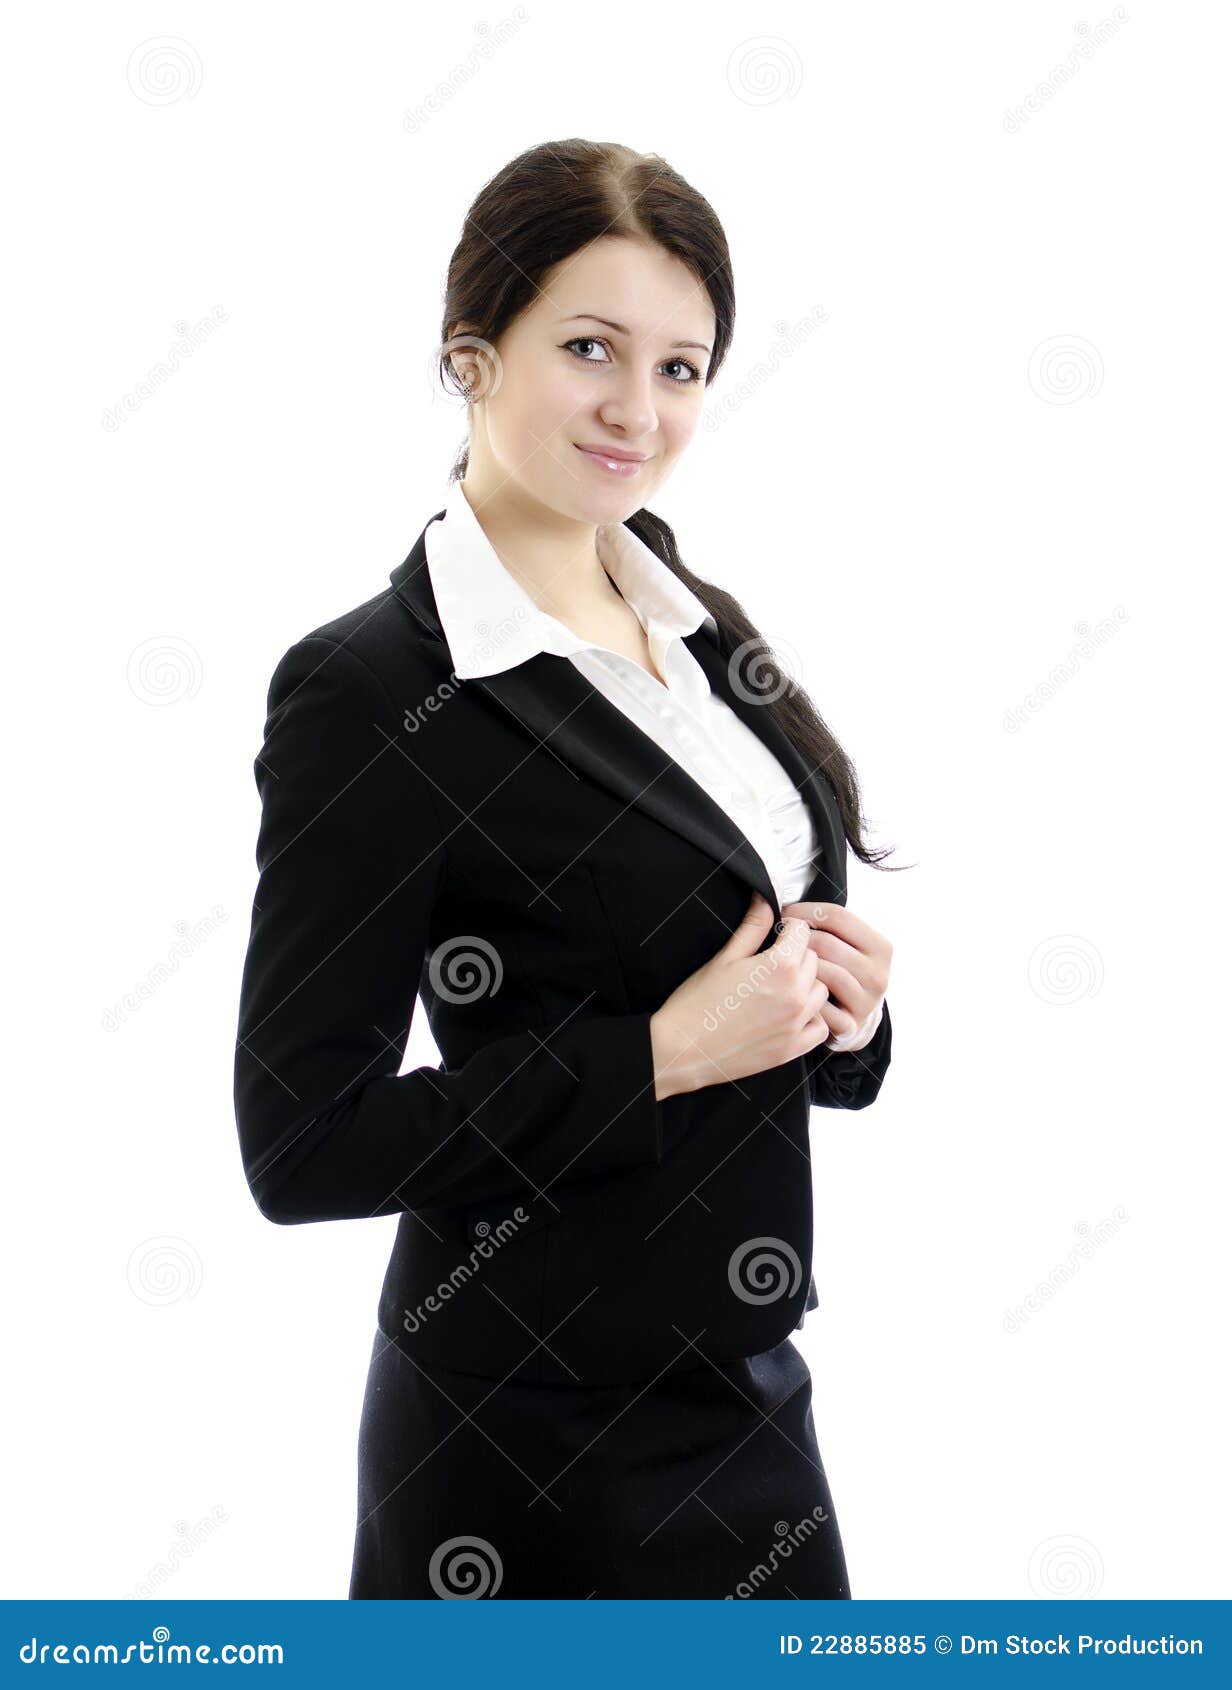 Portrait of Attractive Business Woman Stock Image - Image of copy ...